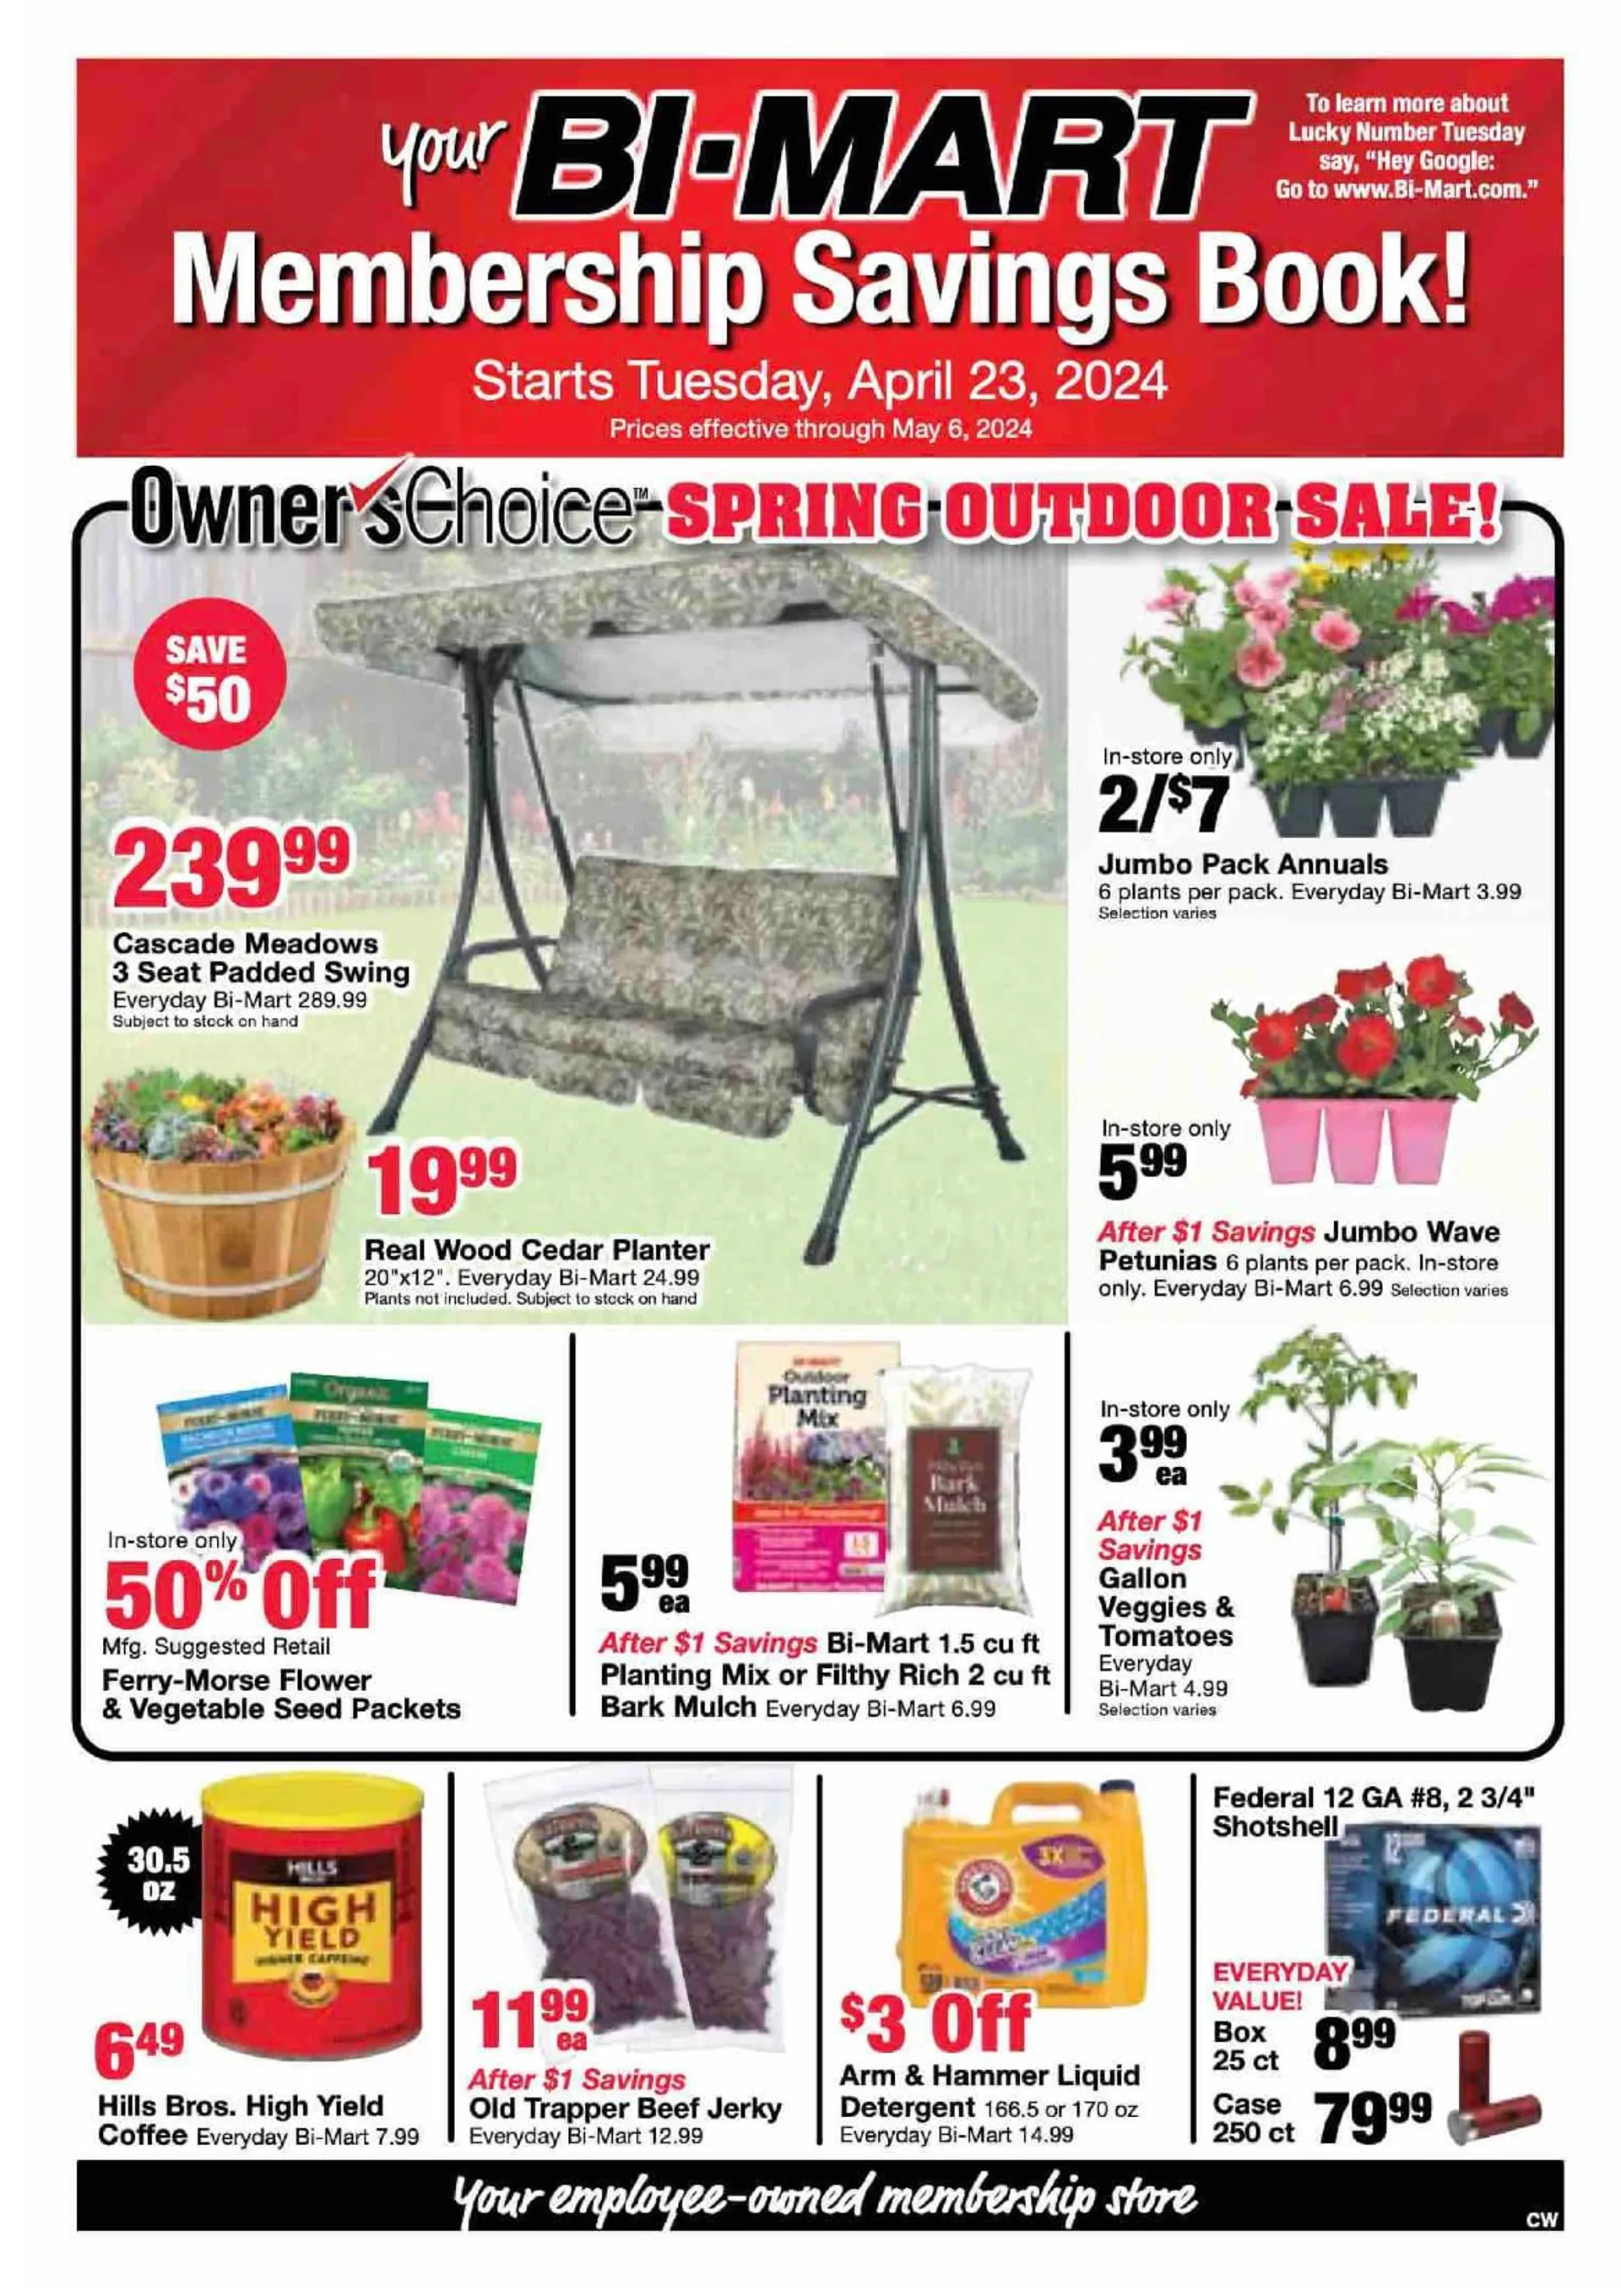 Weekly ad BI-MART SALES from April 23 to May 6 2024 - Page 1